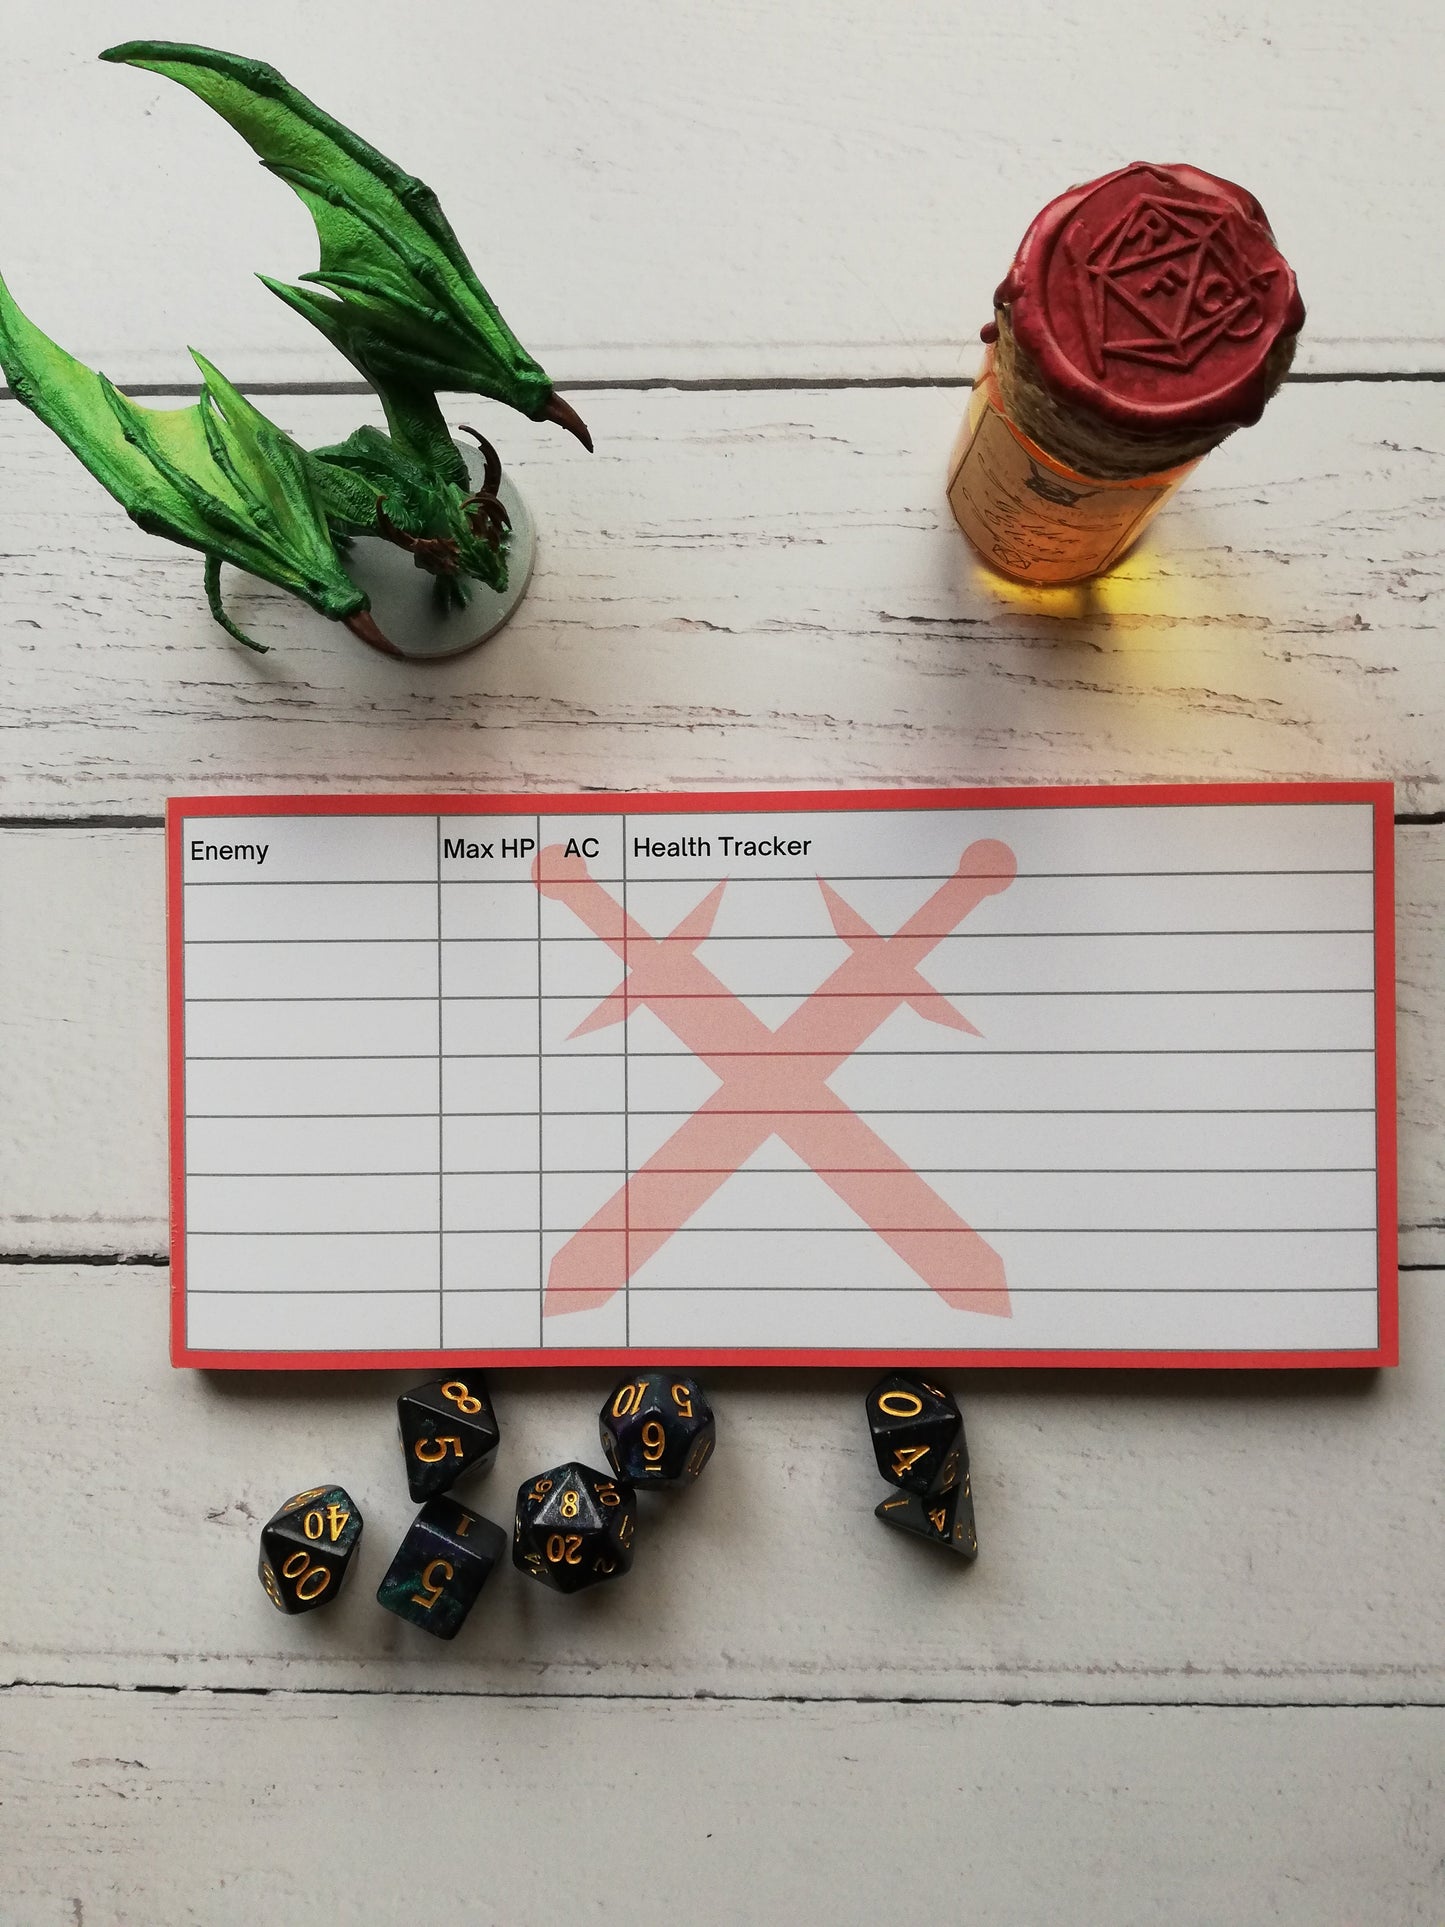 Health Tracker Notepads for Enemies